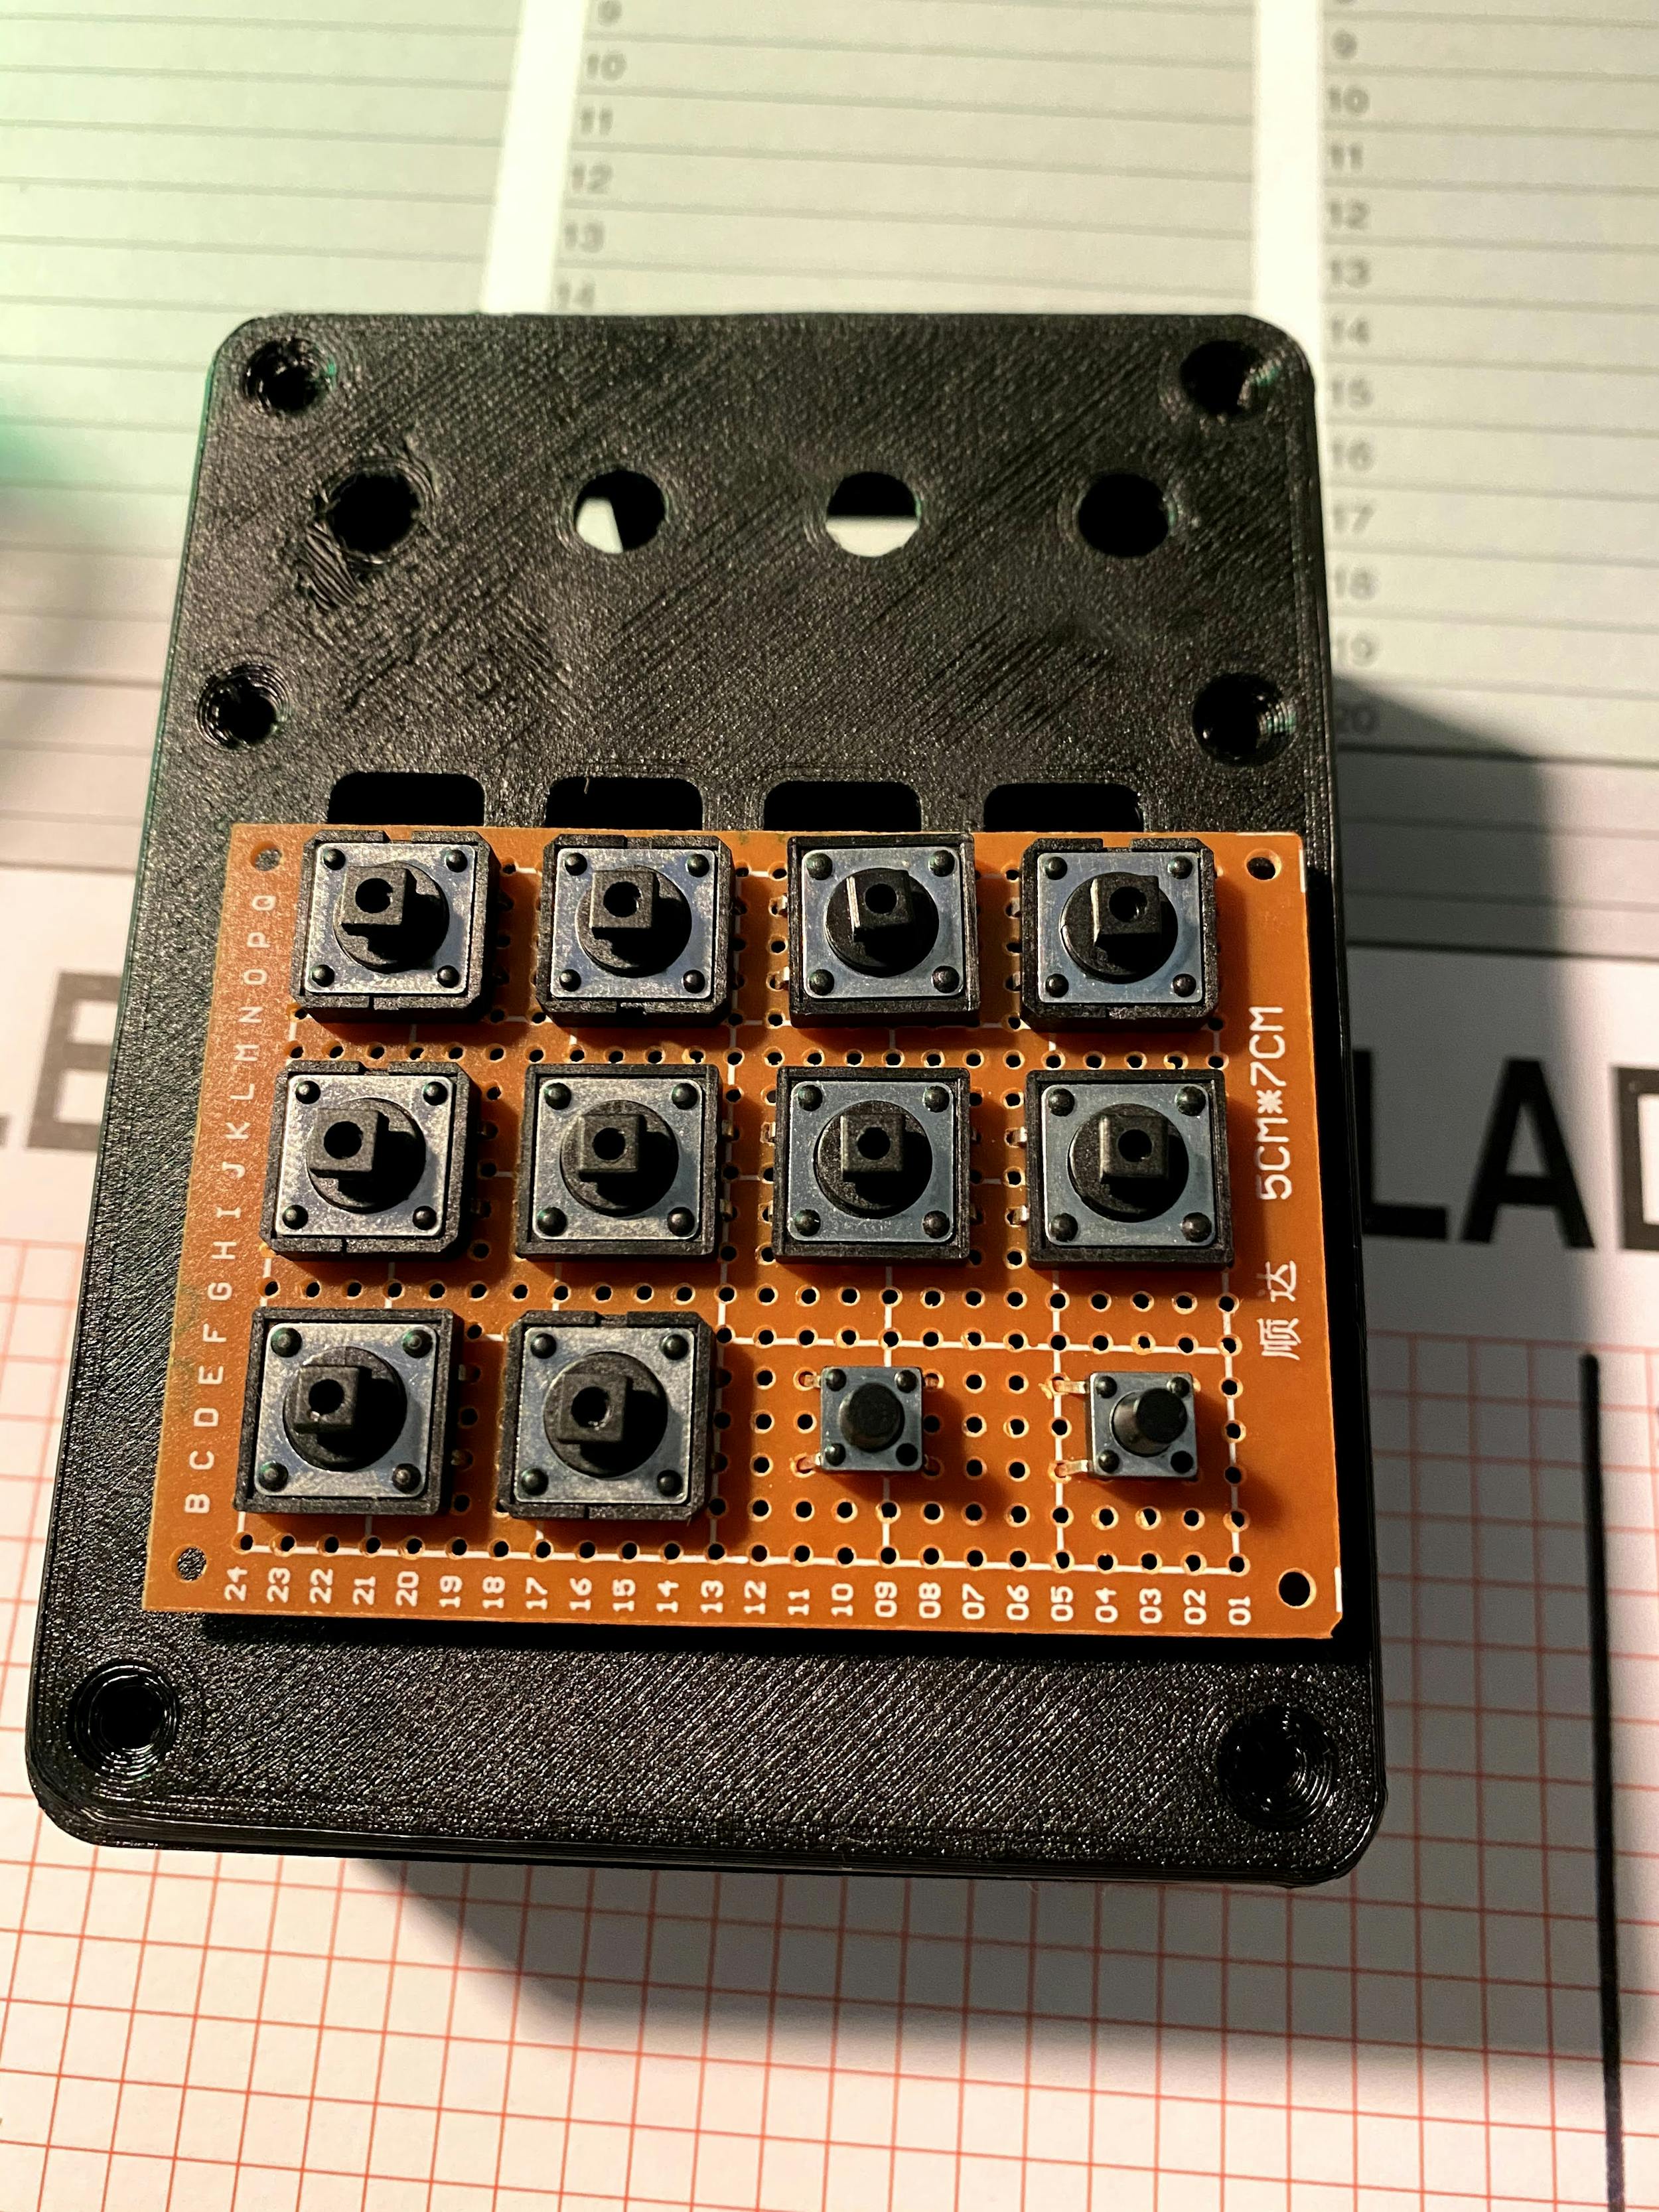 A 3 by 4 grid of buttons, lined up on protoboard to start prototyping the build